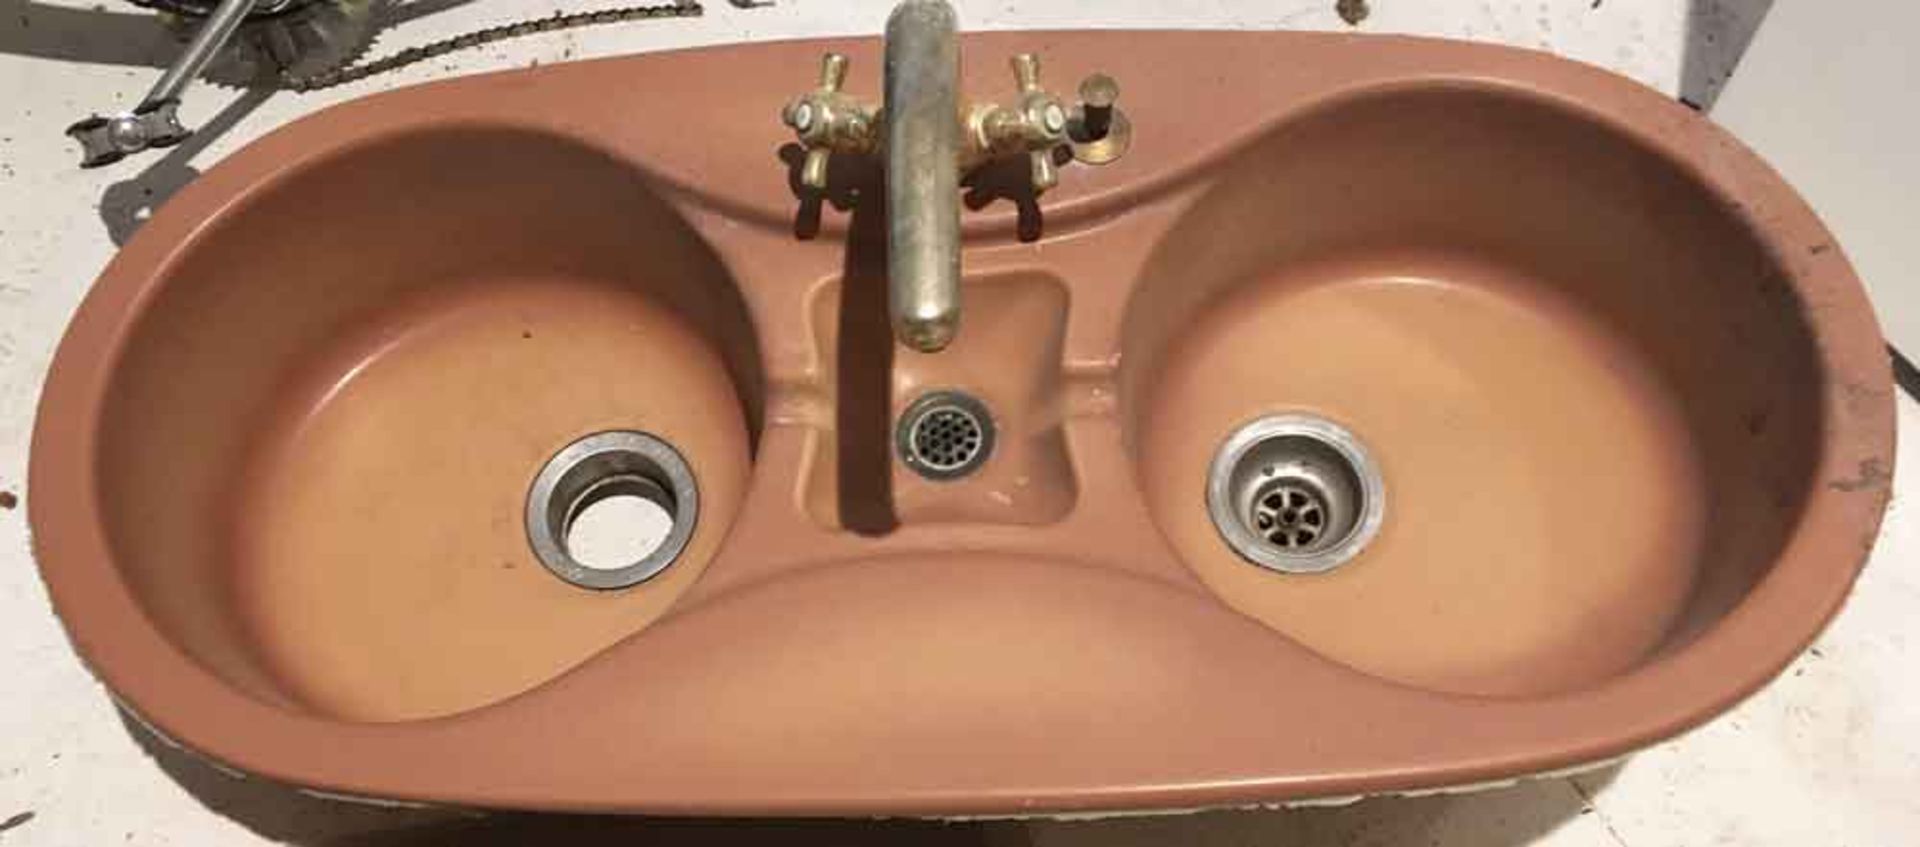 Double Bowl Sink with Taps